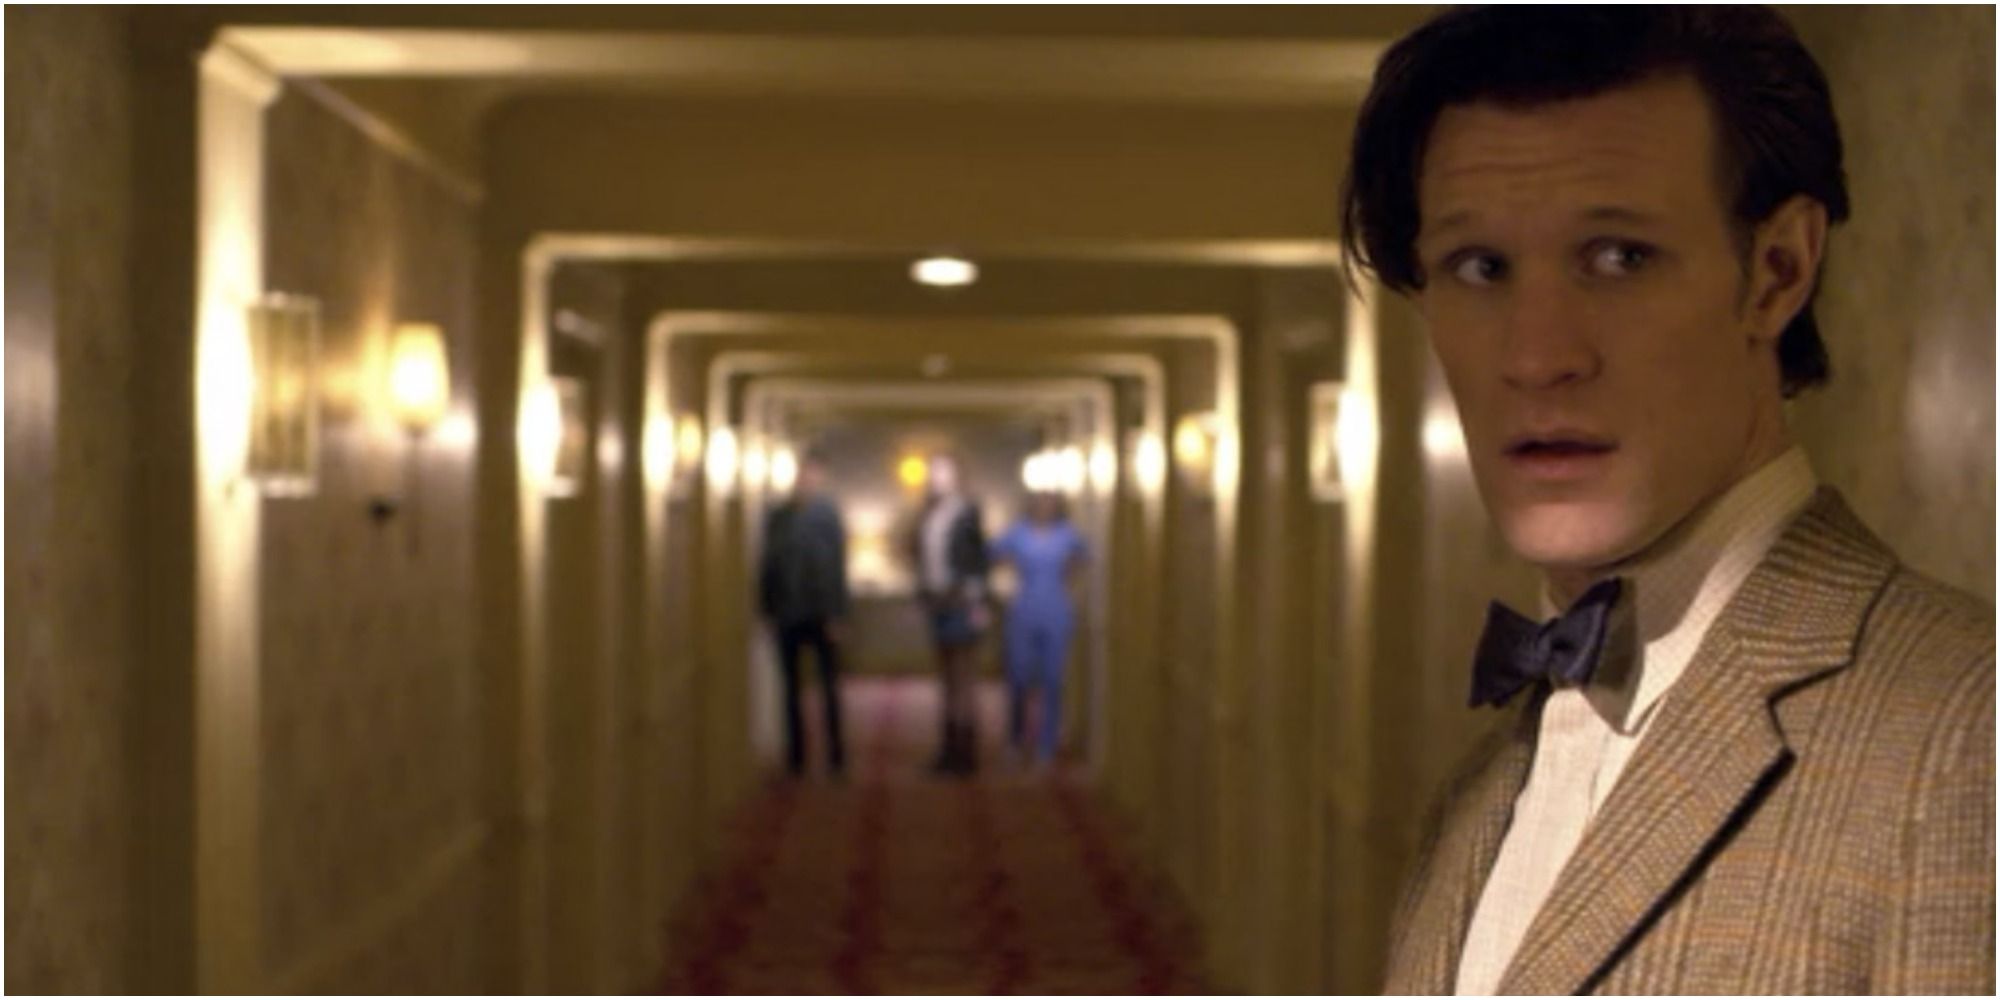 The Eleventh Doctor stands in a hotel hallway with others in the background behind him in Doctor Who.